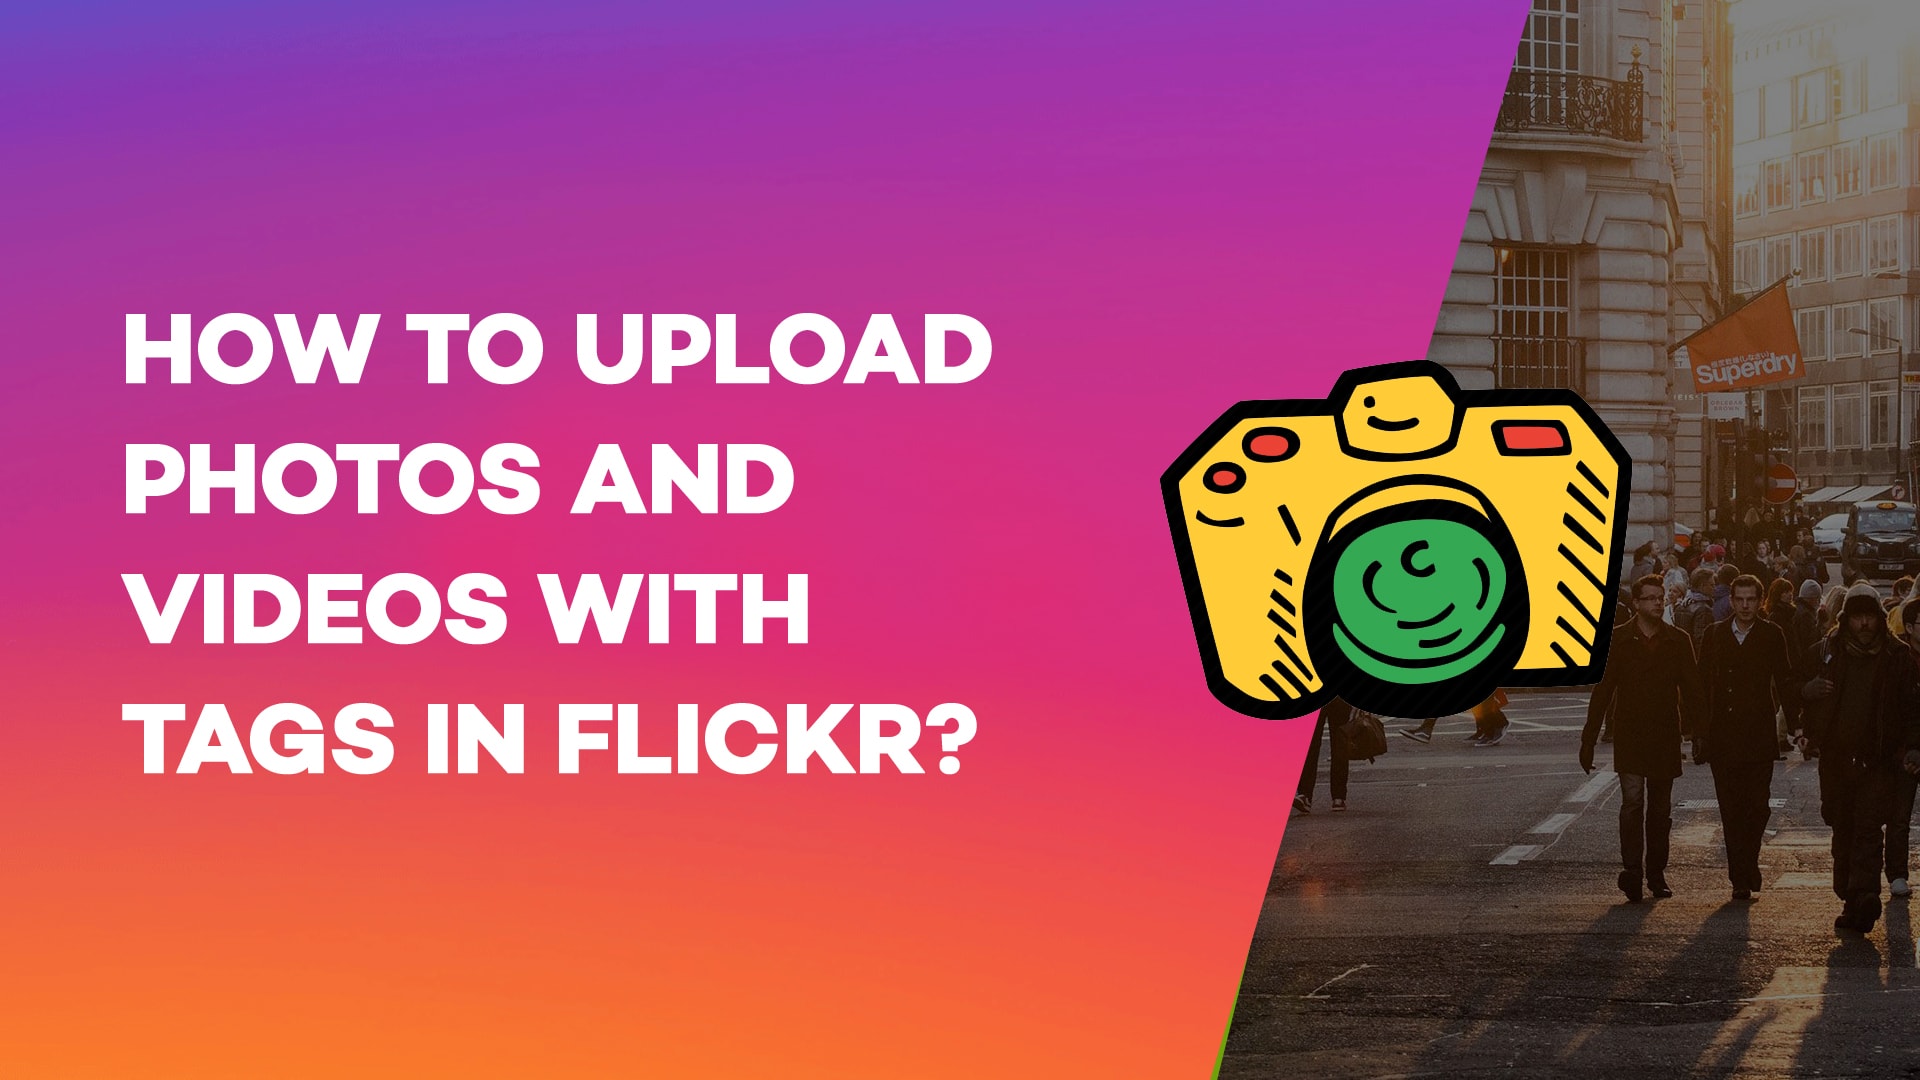 How to upload photos and videos with Tags in Flickr?